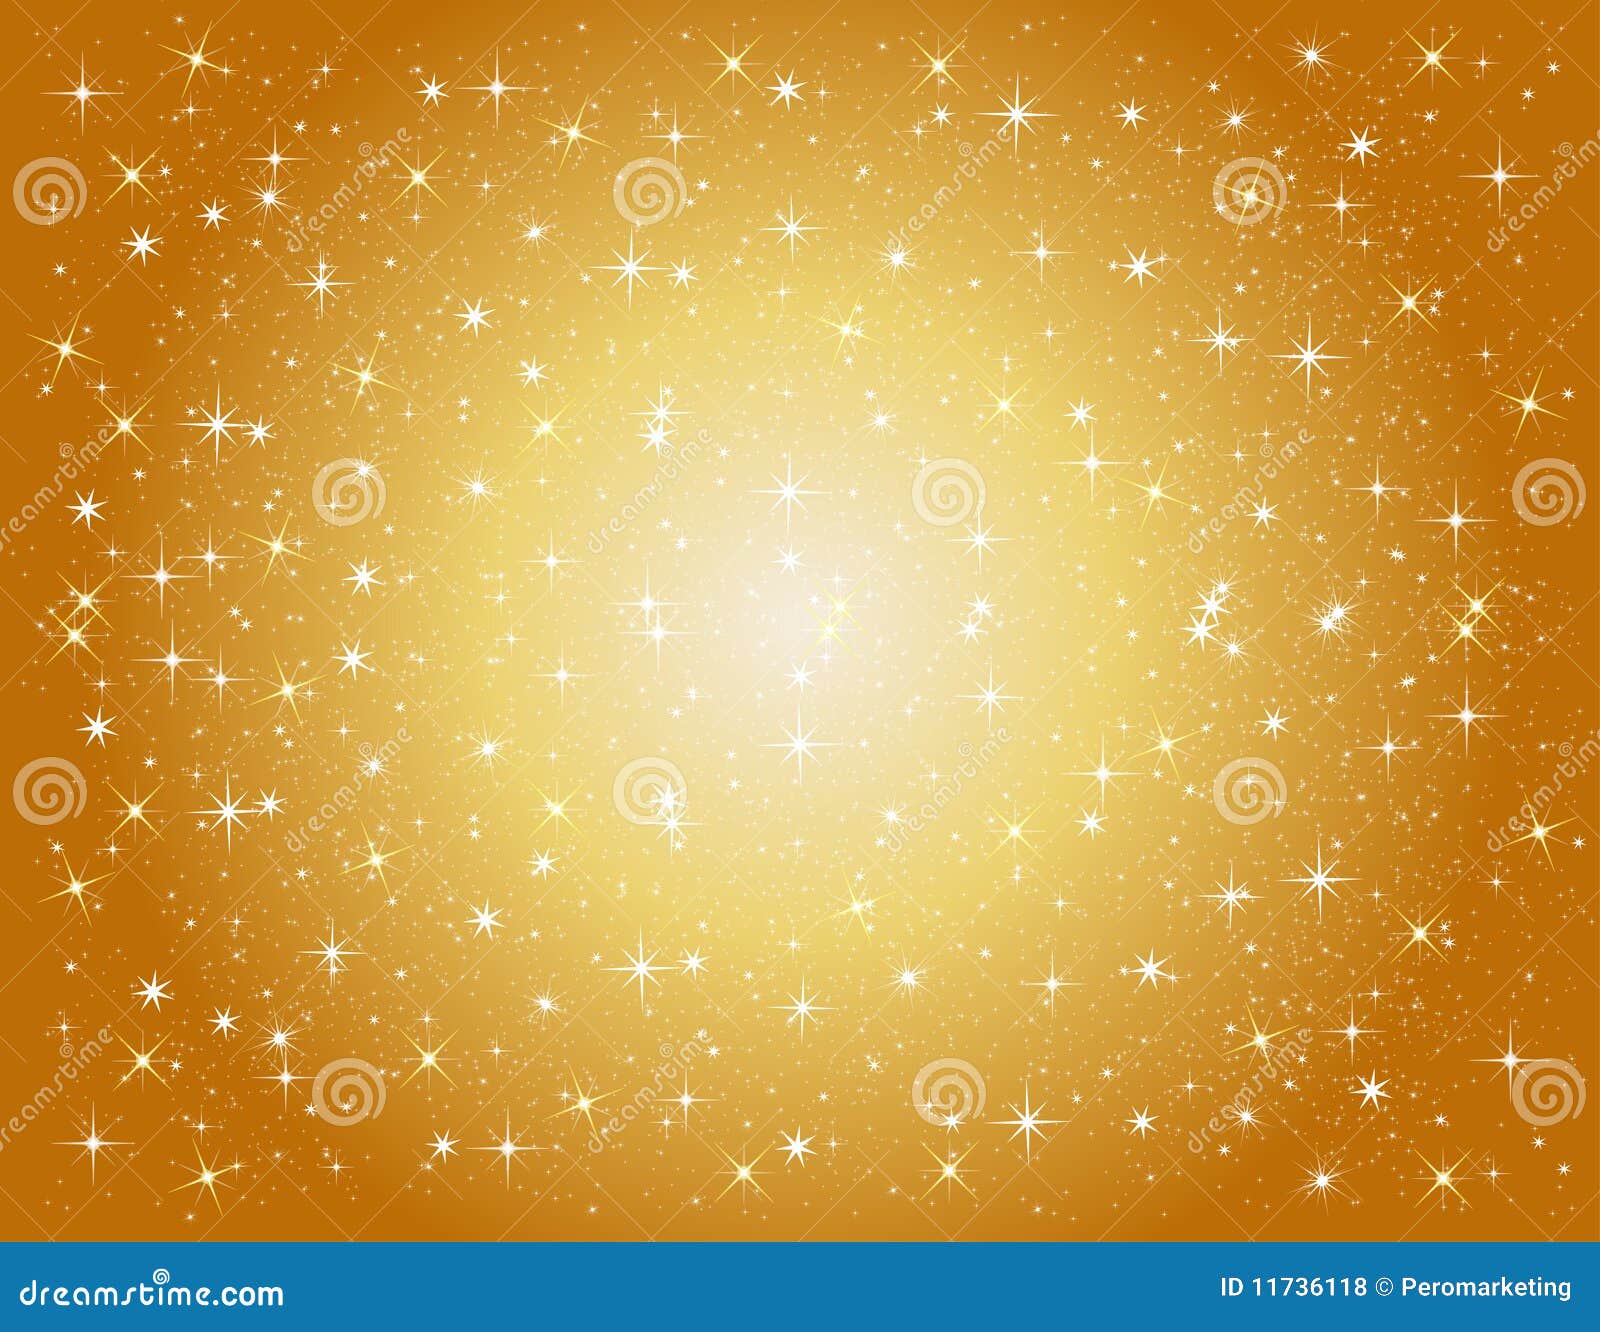 stars backgrounds tumblr Stock Image  Star Photos  Royalty Free Golden Background